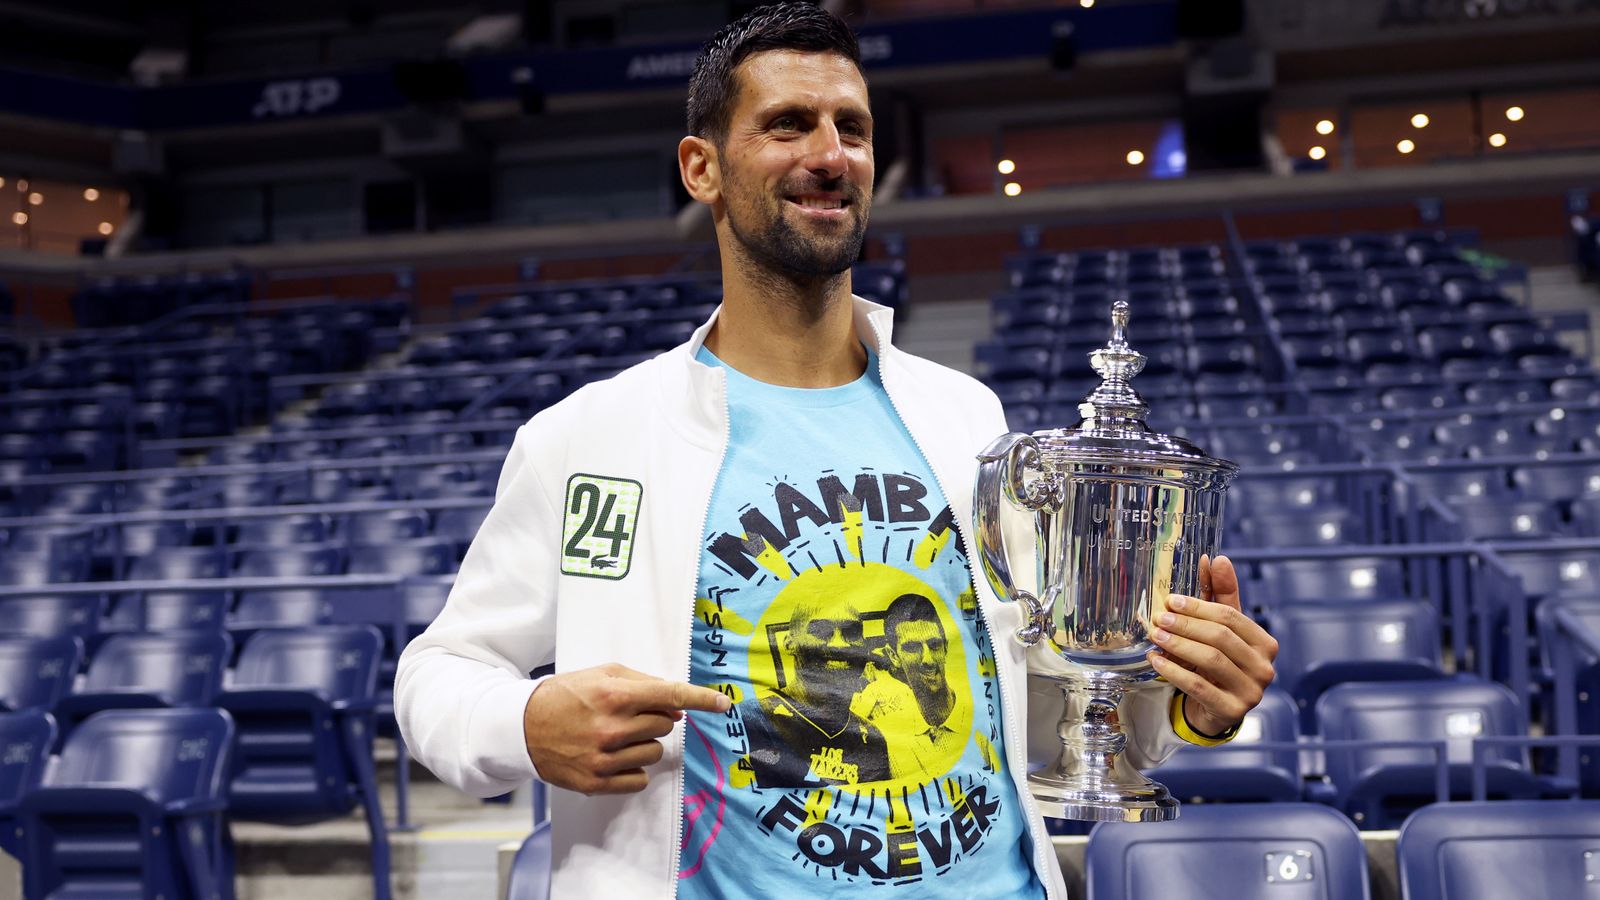 US Open: Novak Djokovic pays tribute to Kobe Bryant following 24th Grand Slam victory as he vows to continue playing | Tennis News